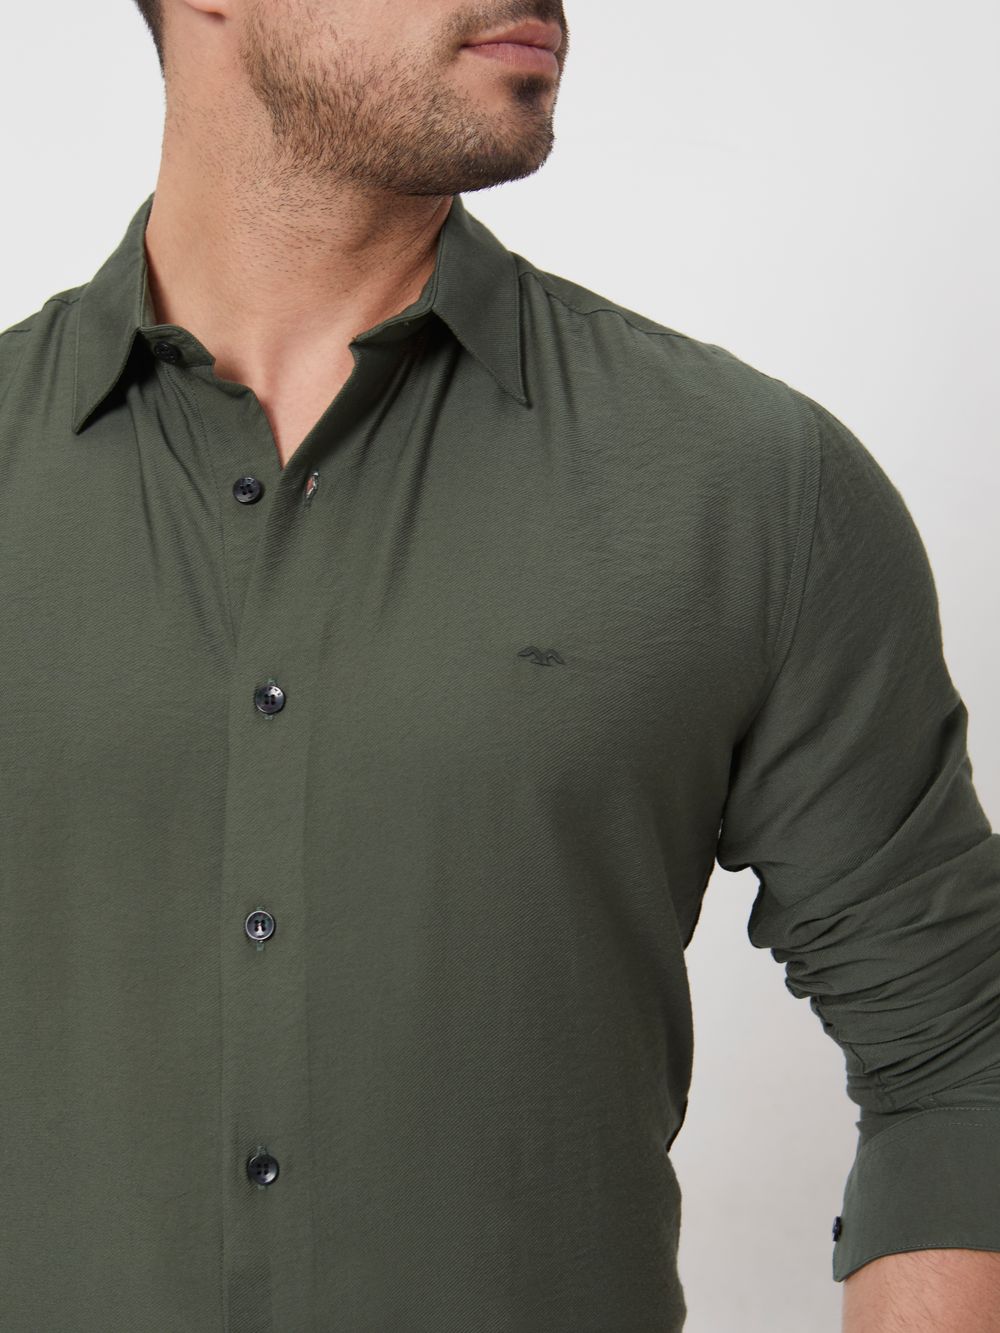 Olive Textured Plain Slim Fit Casual Shirt